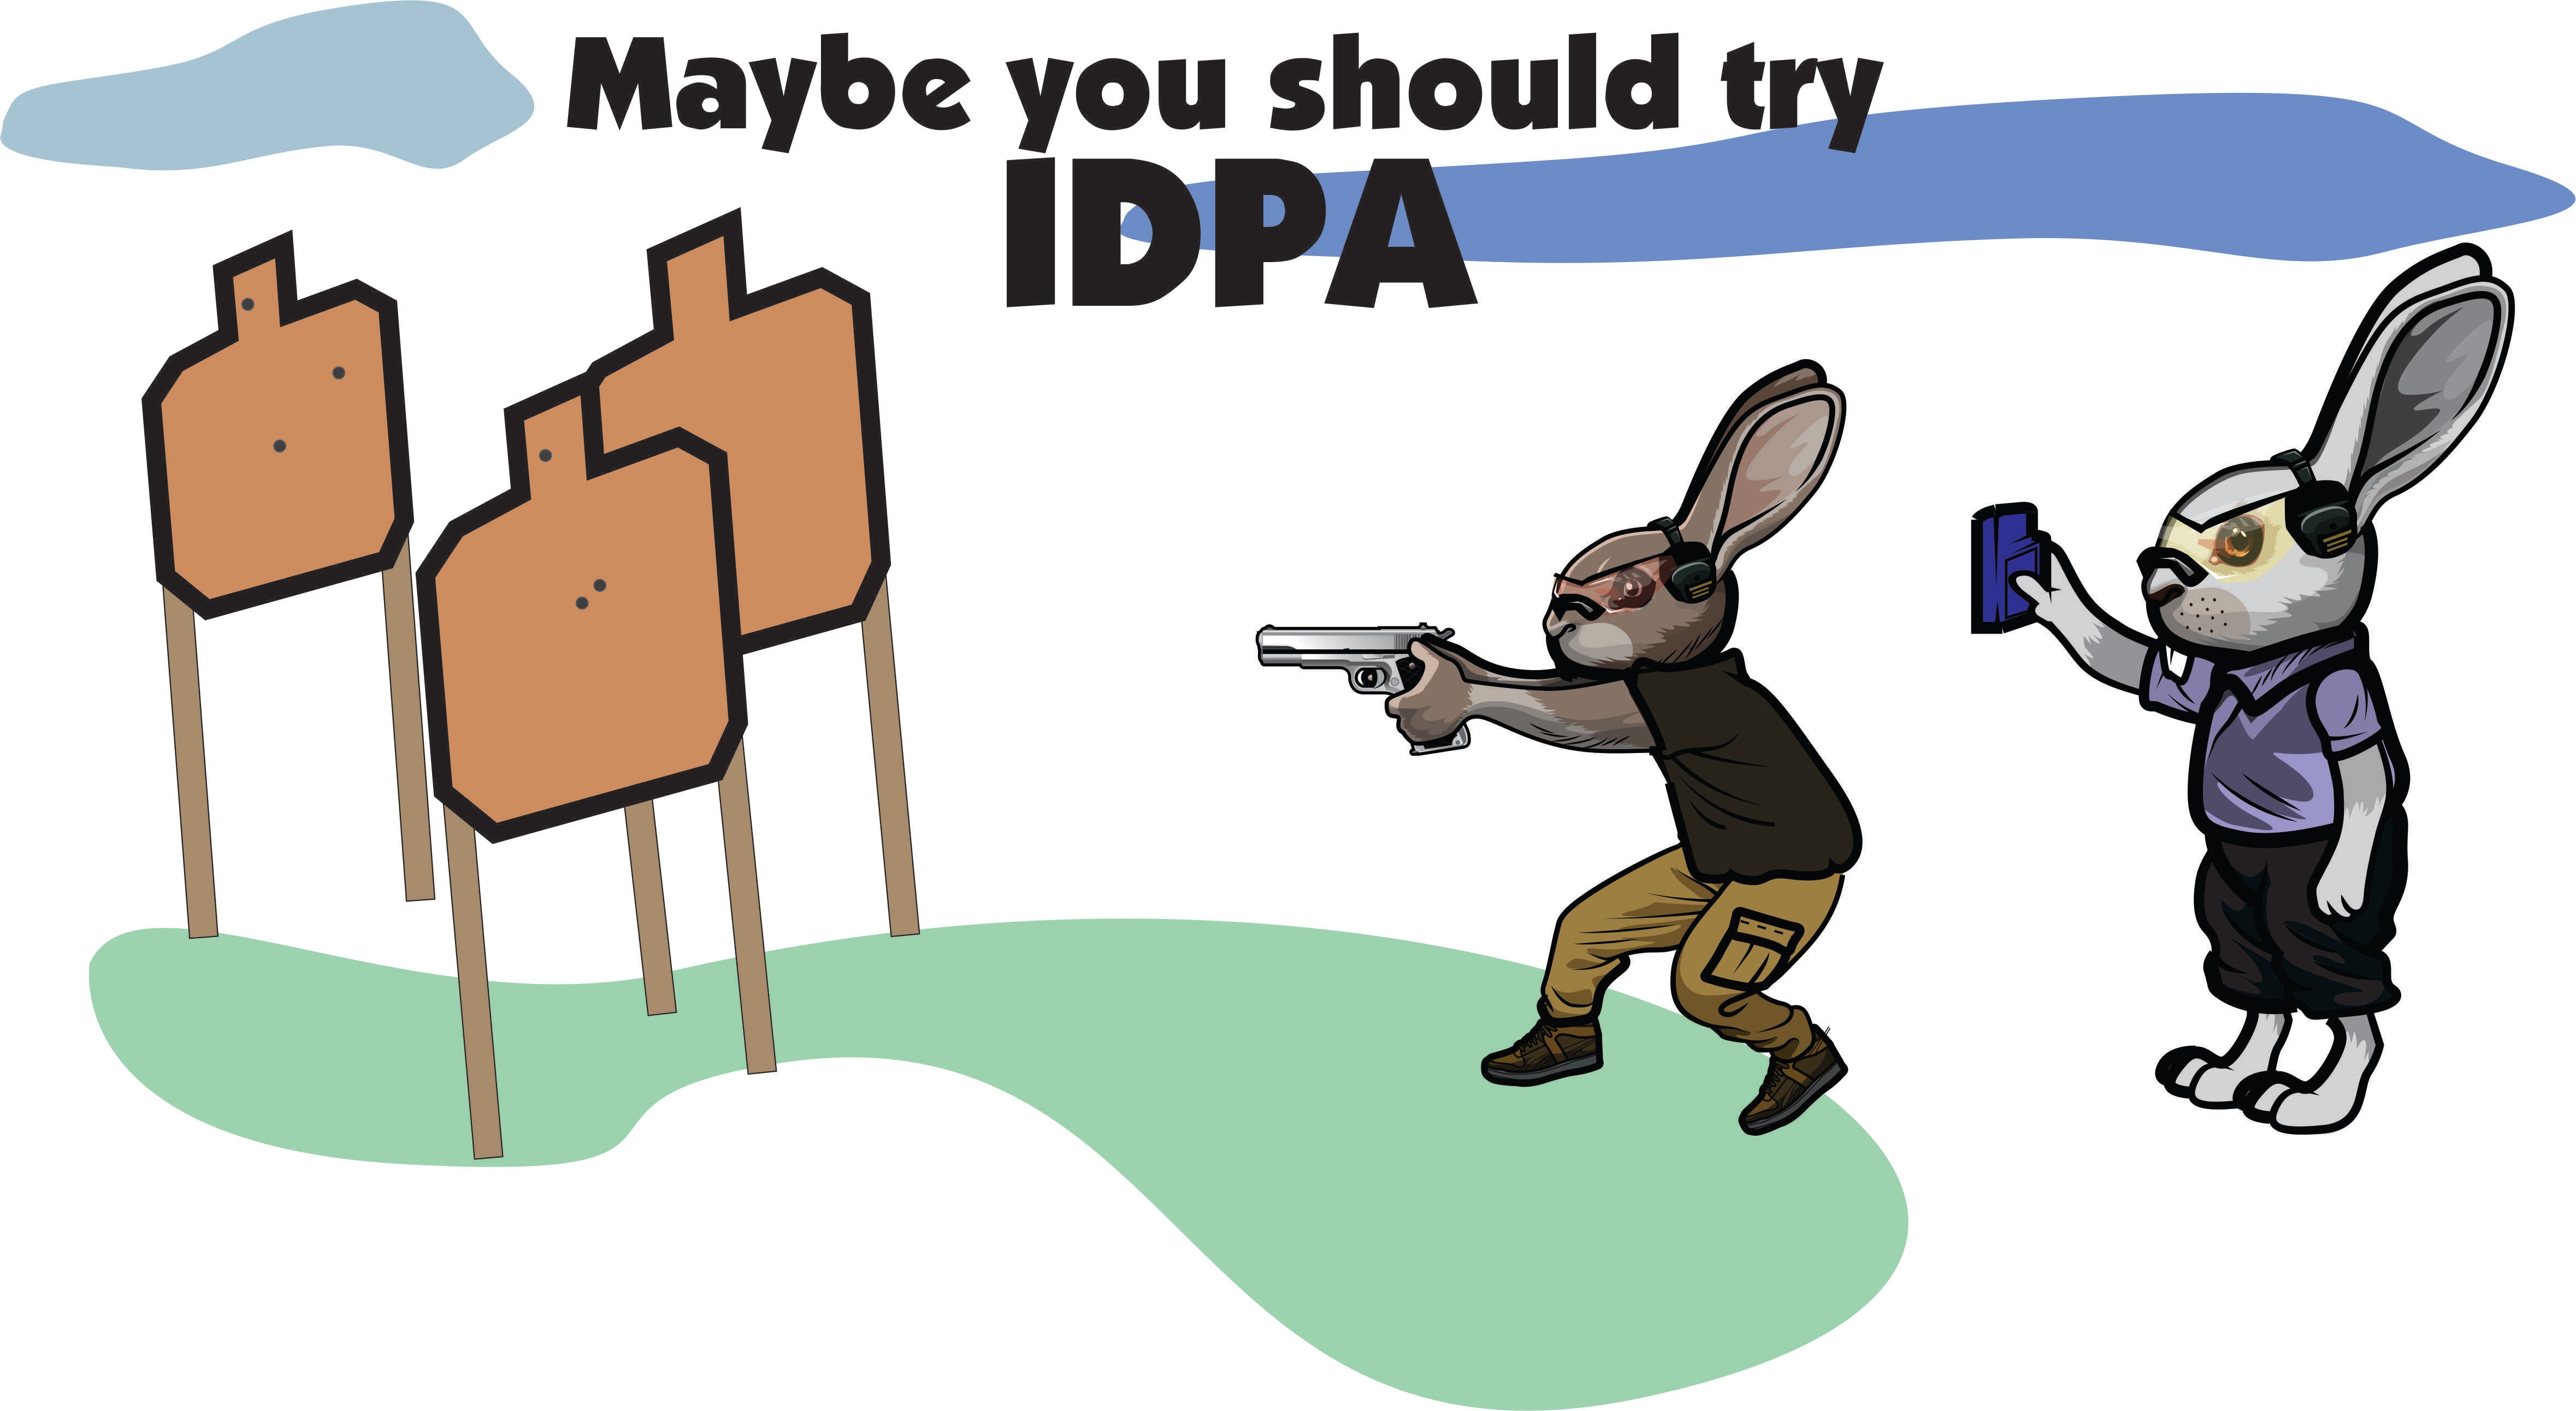 Maybe you should try shooting IDPA